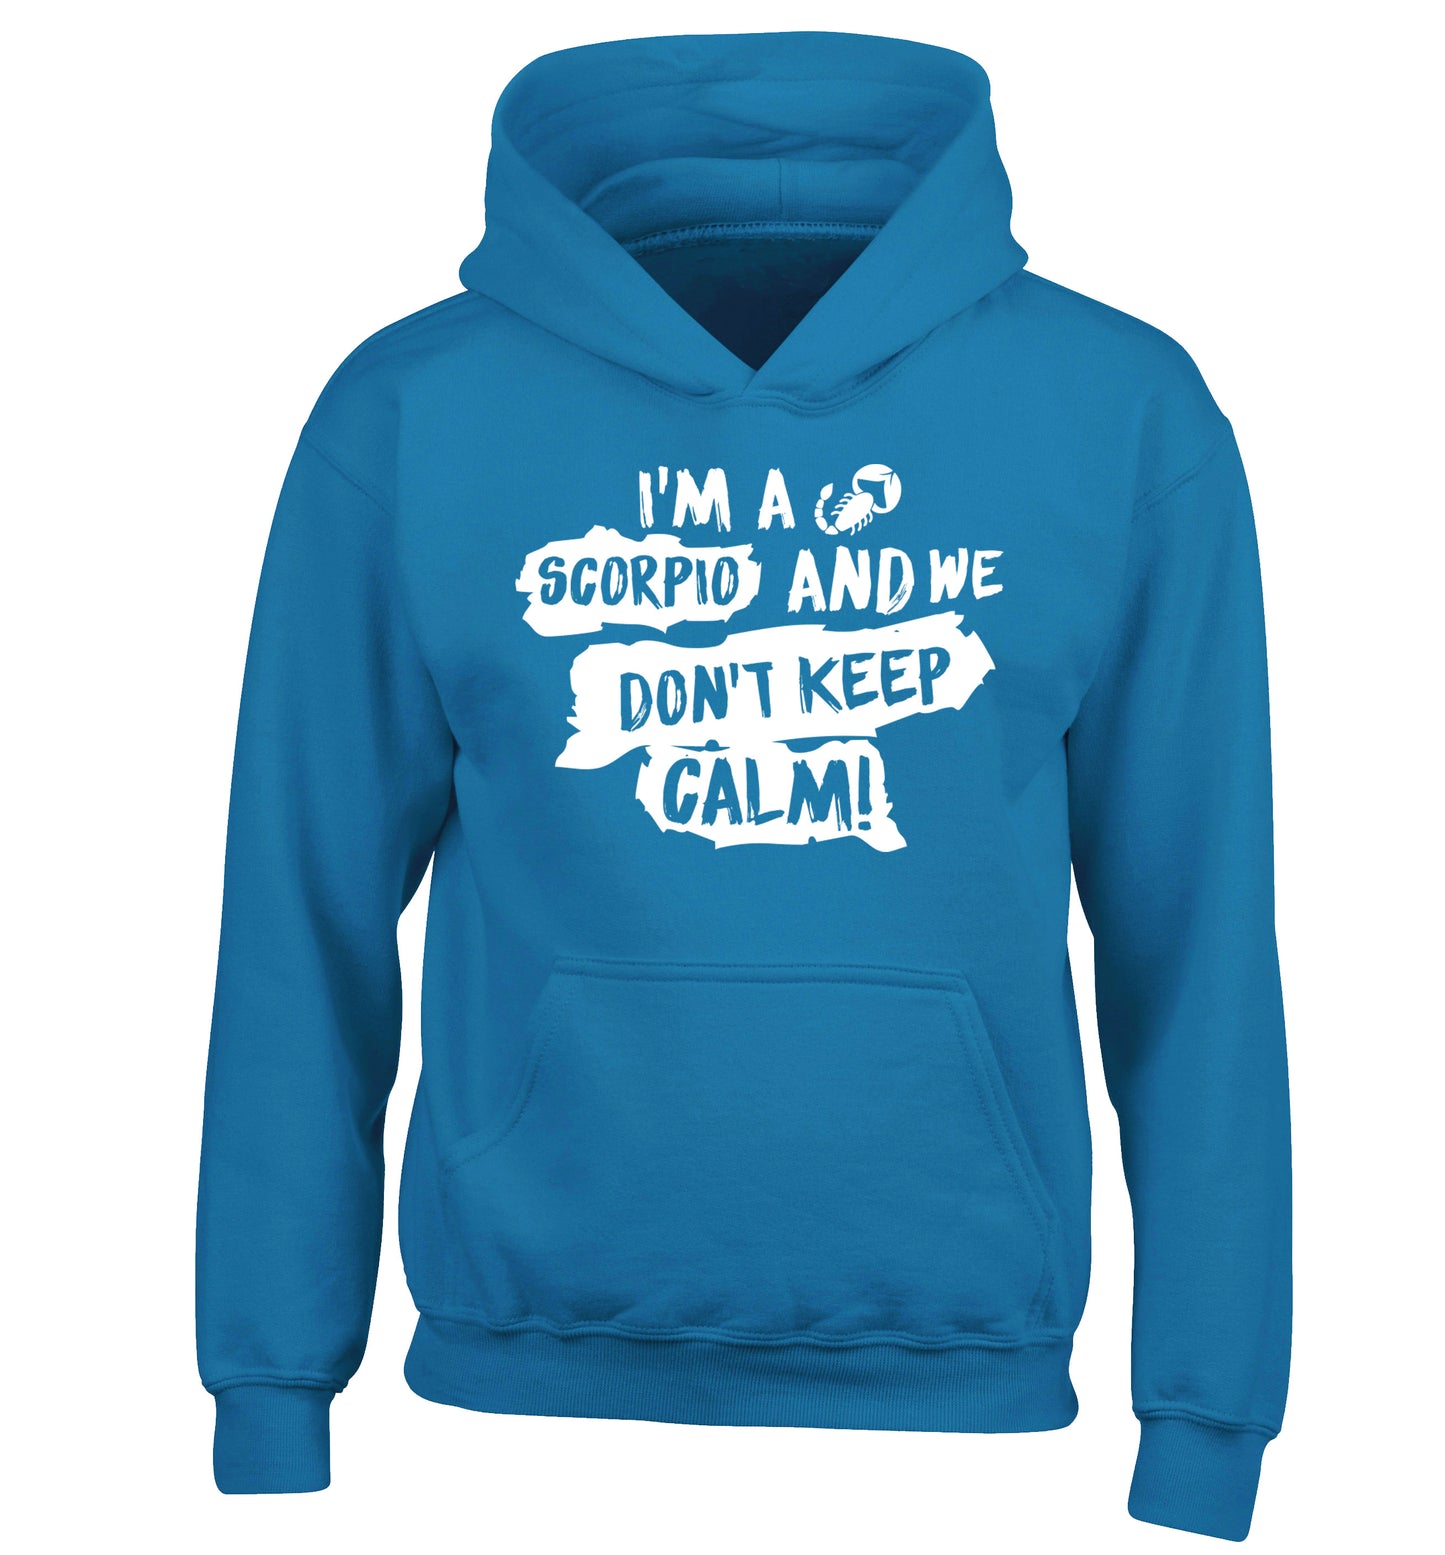 I'm a scorpio and we don't keep calm children's blue hoodie 12-13 Years